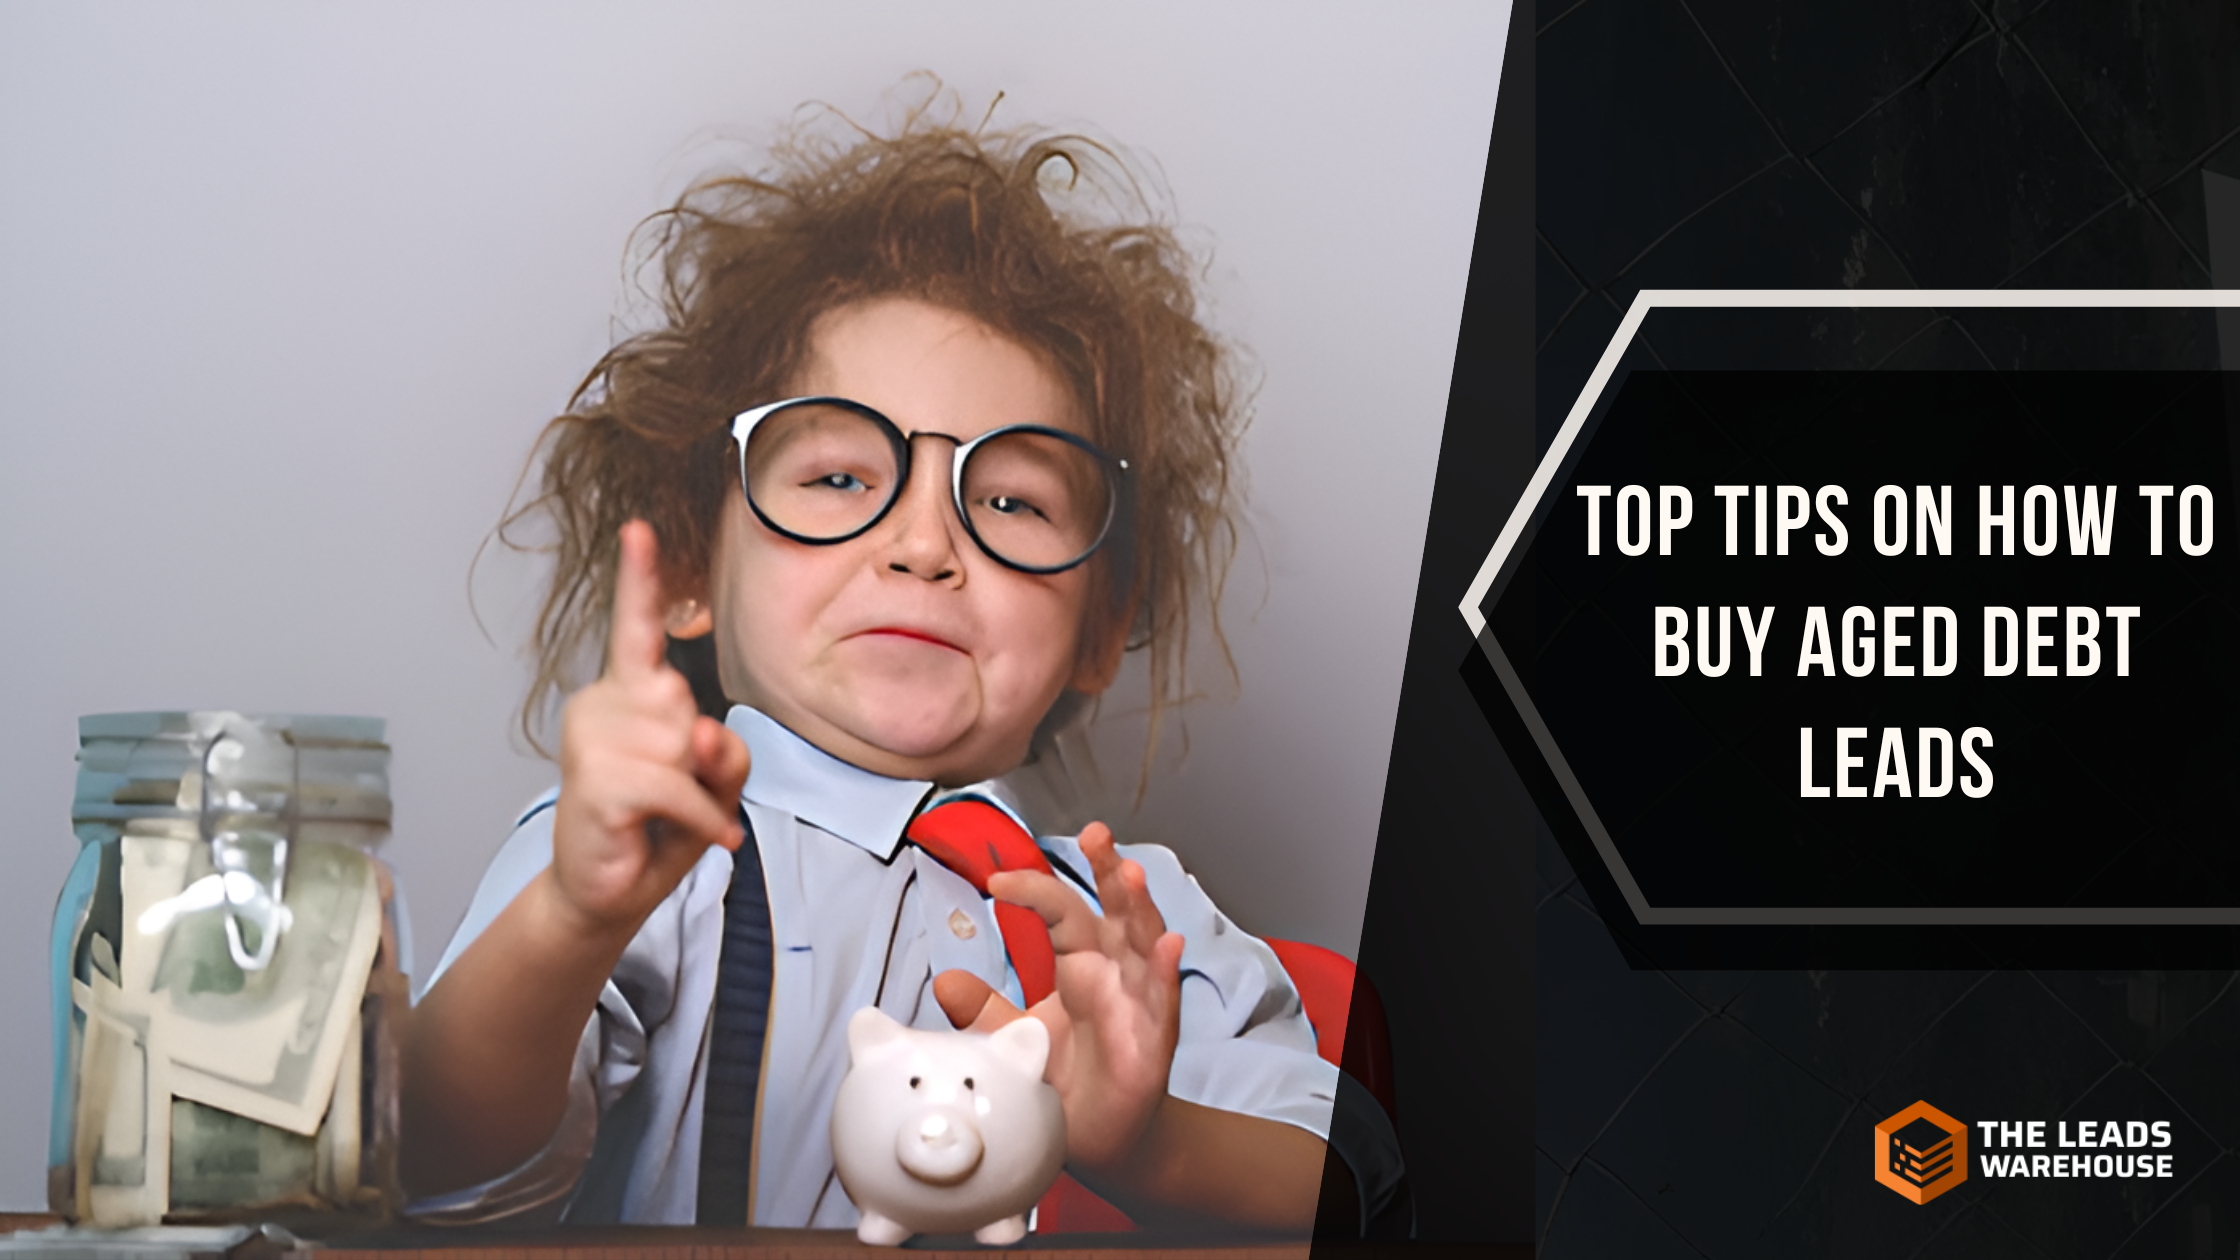 Aged Debt Leads Tip | Top Buying Tips